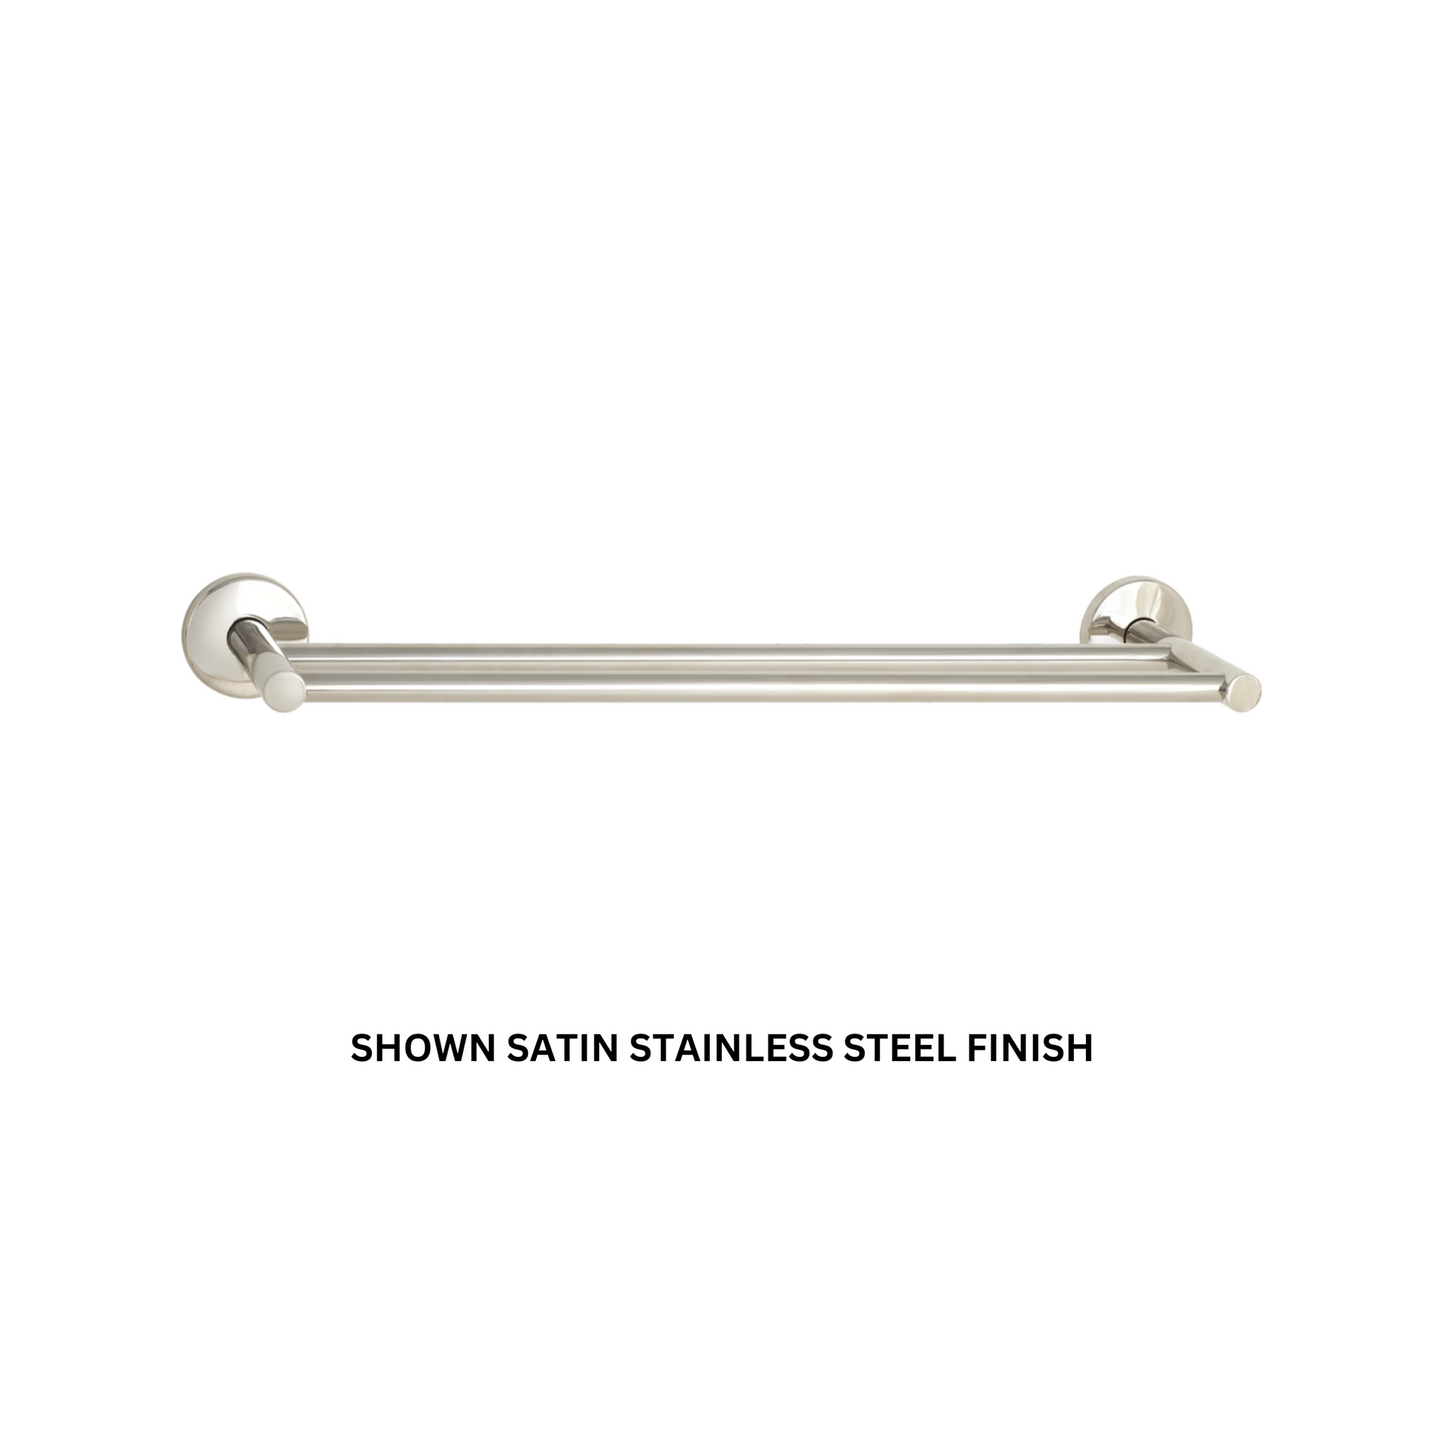 Seachrome Conorado Series 24" White Wrinkle Powder Coat Concealed Mounting Flange Double Towel Bar